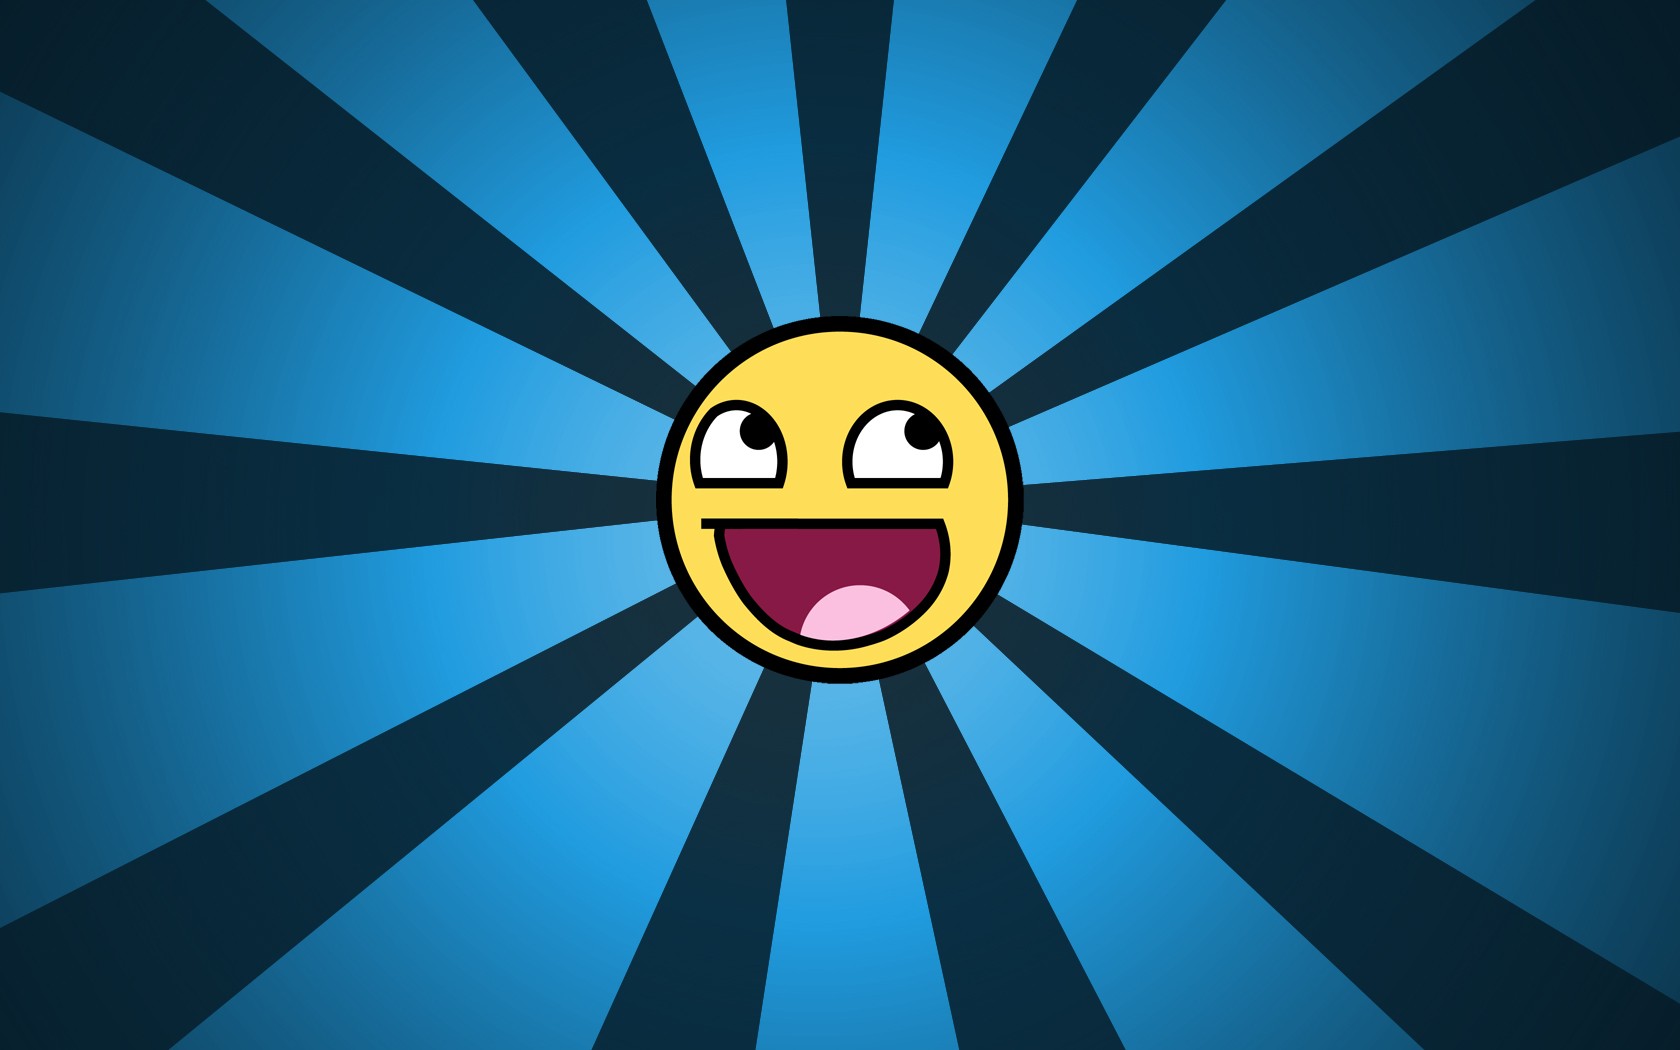 General 1680x1050 happy face awesome face blue background memes sun rays